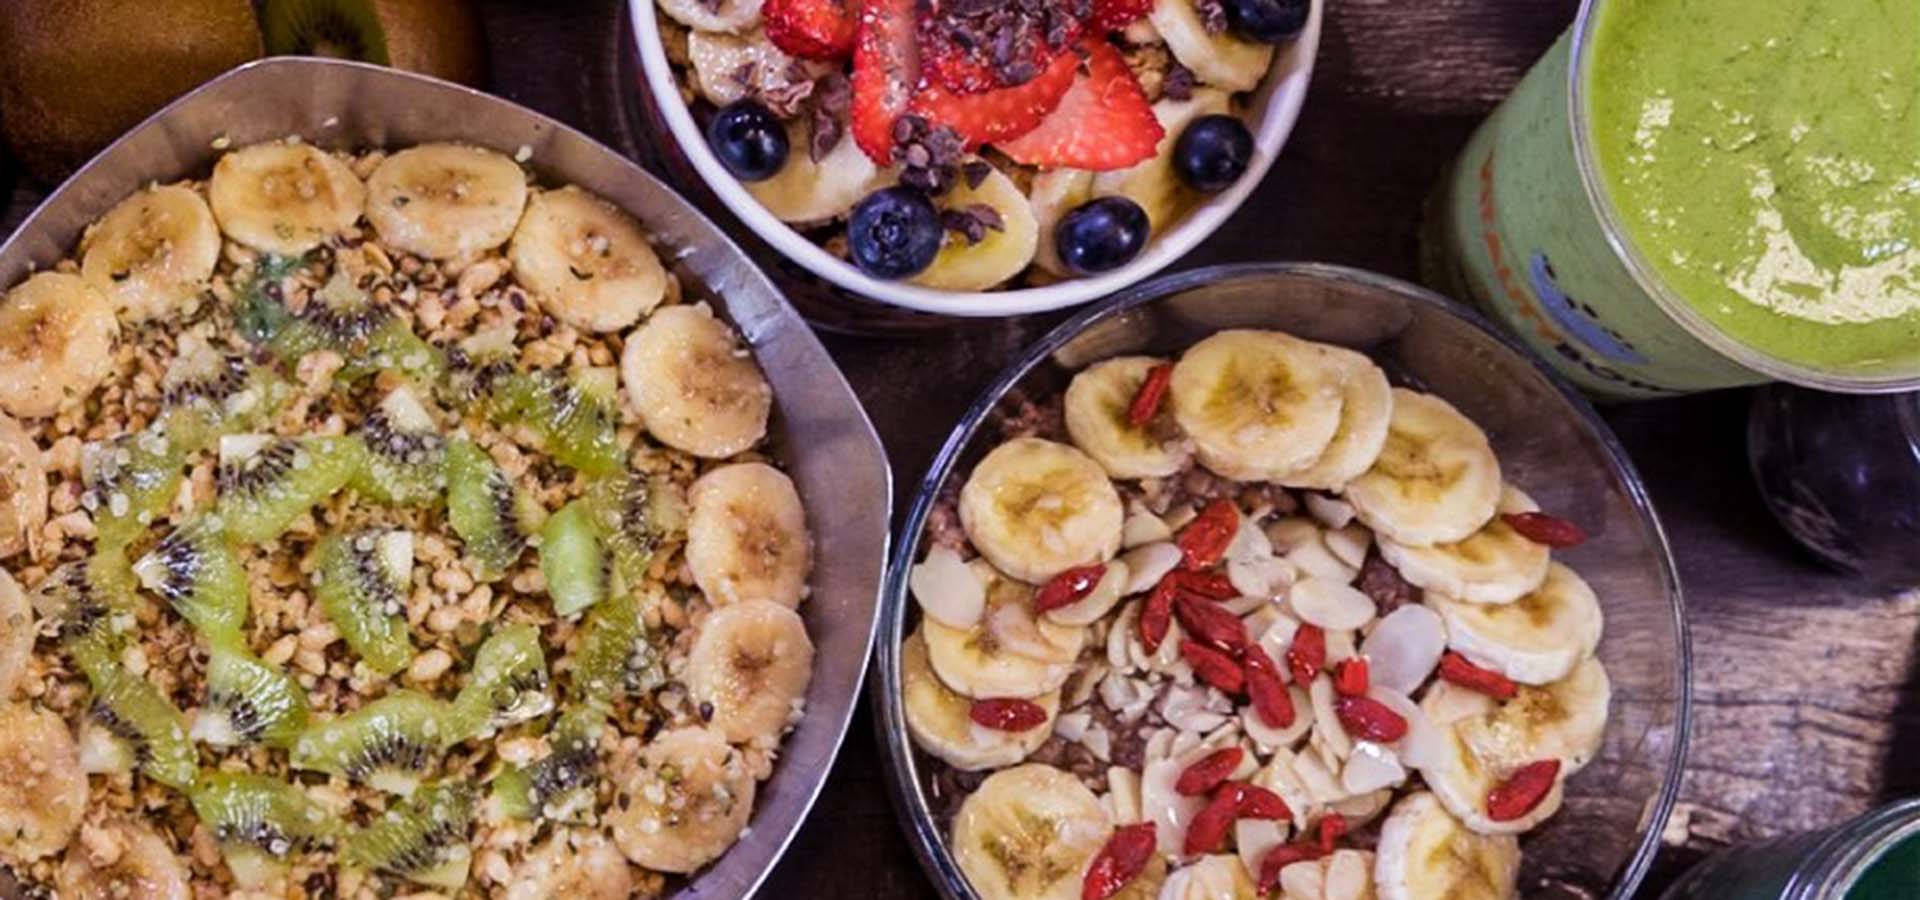 Table with acai and fruit bowls on it